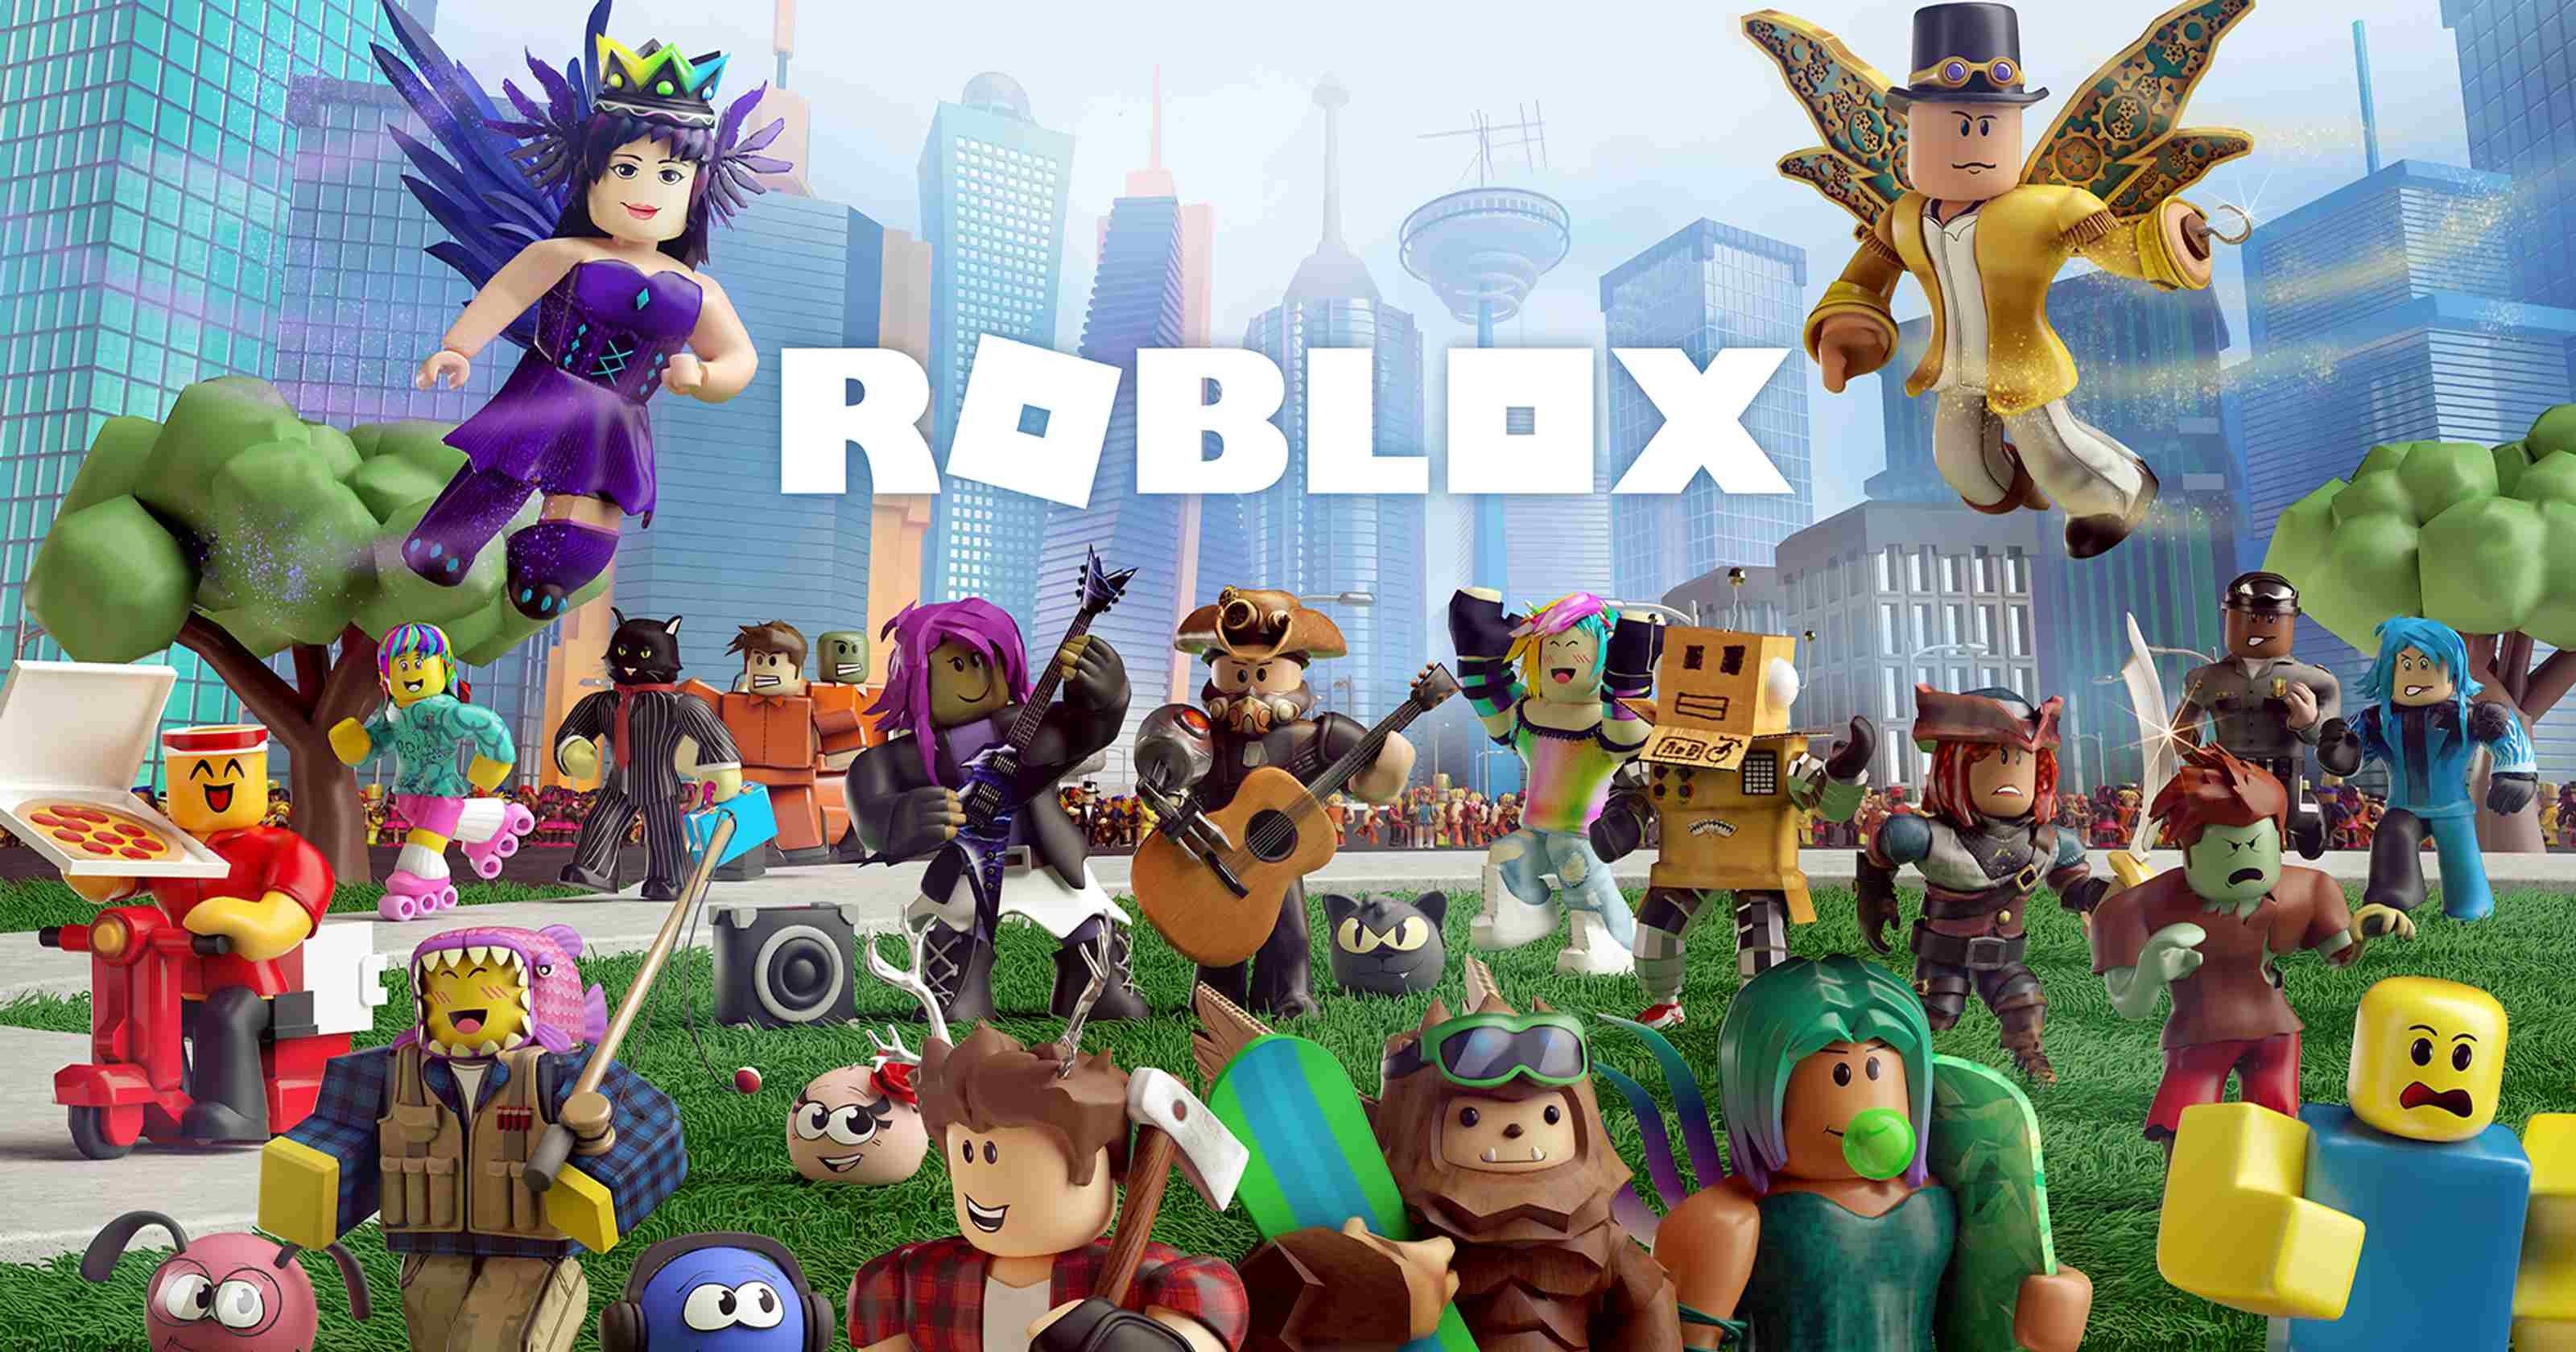 Make A Roblox Wallpaper Data Src Img 991453 Roblox Backgrounds 3200x1680 Wallpaper Teahub Io - how to get a background for roblox